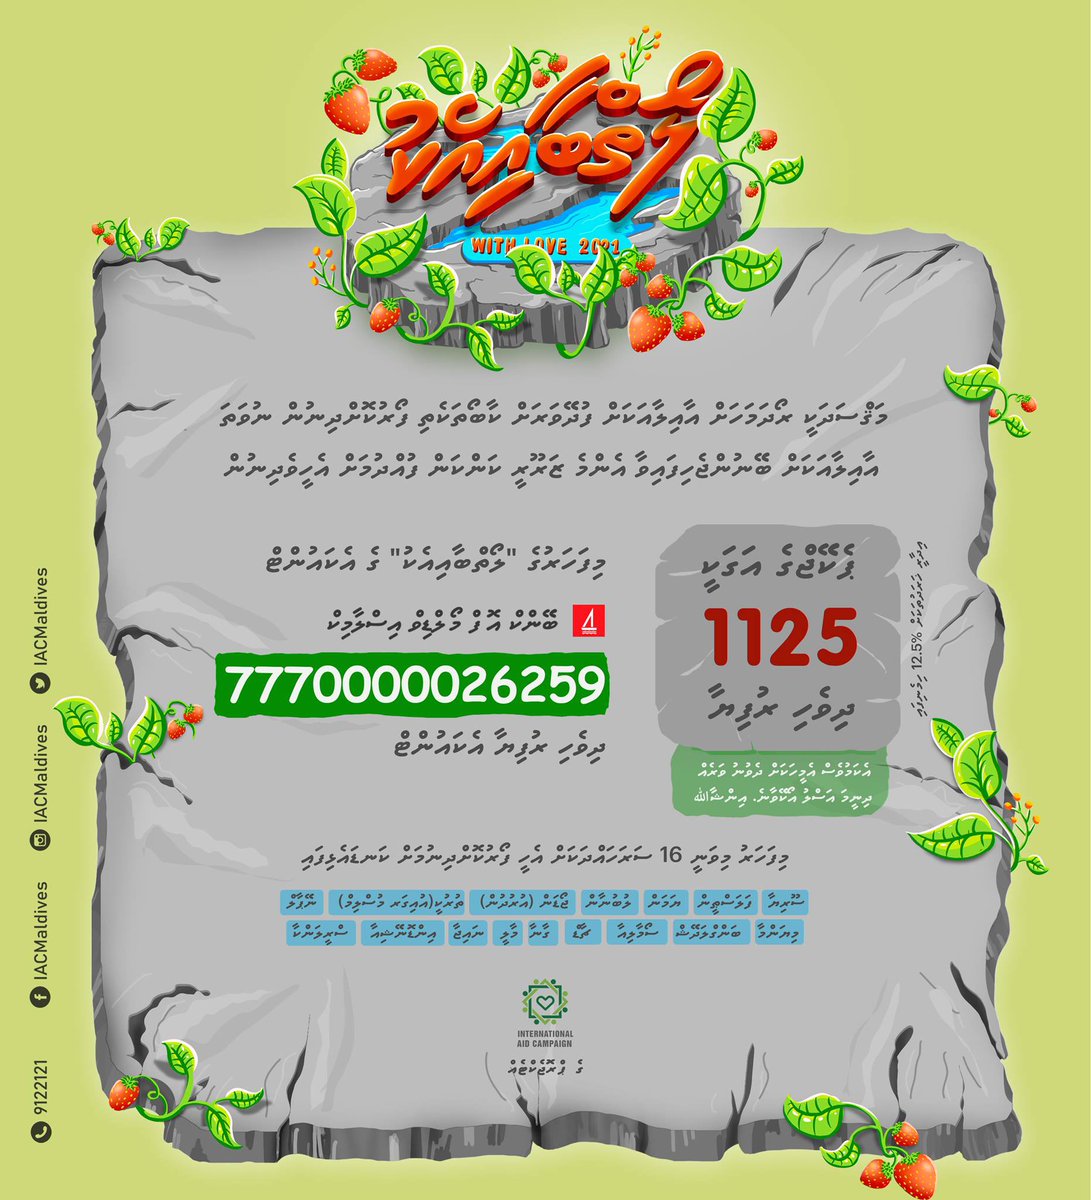 . @IACMaldives is accepting donations under their “With Love 2021” campaign to provide food and other essentials to a family in need. Please follow their Twitter handle for details on how to proceed with your donations.